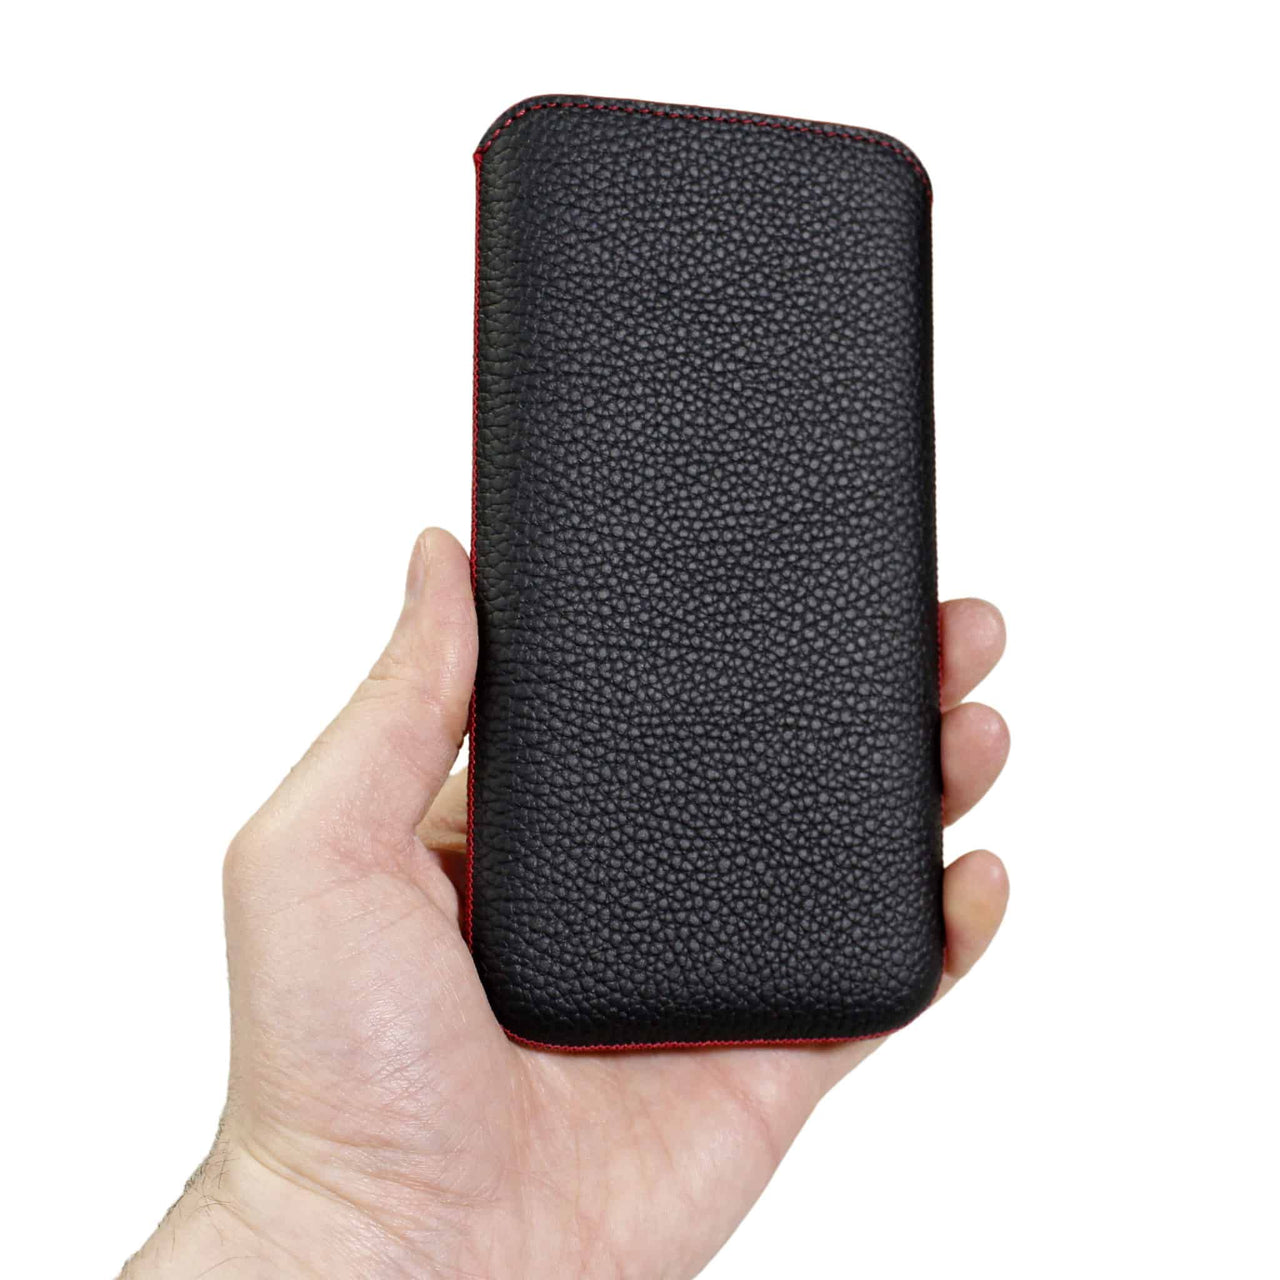 iPhone 12 Pro Max Genuine Leather Pouch Sleeve Case | Artisanpouch